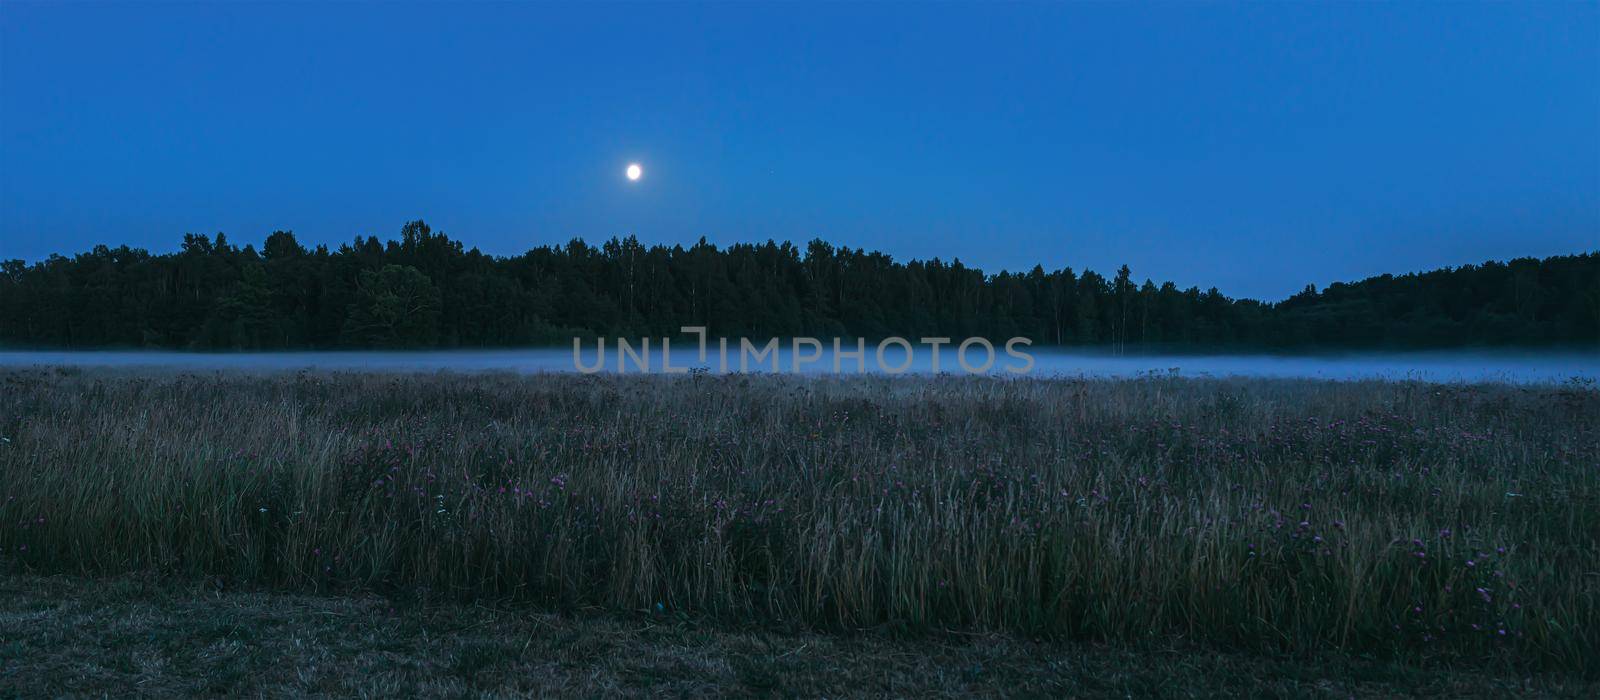 Night view of the forest shrouded in fog with a full moon